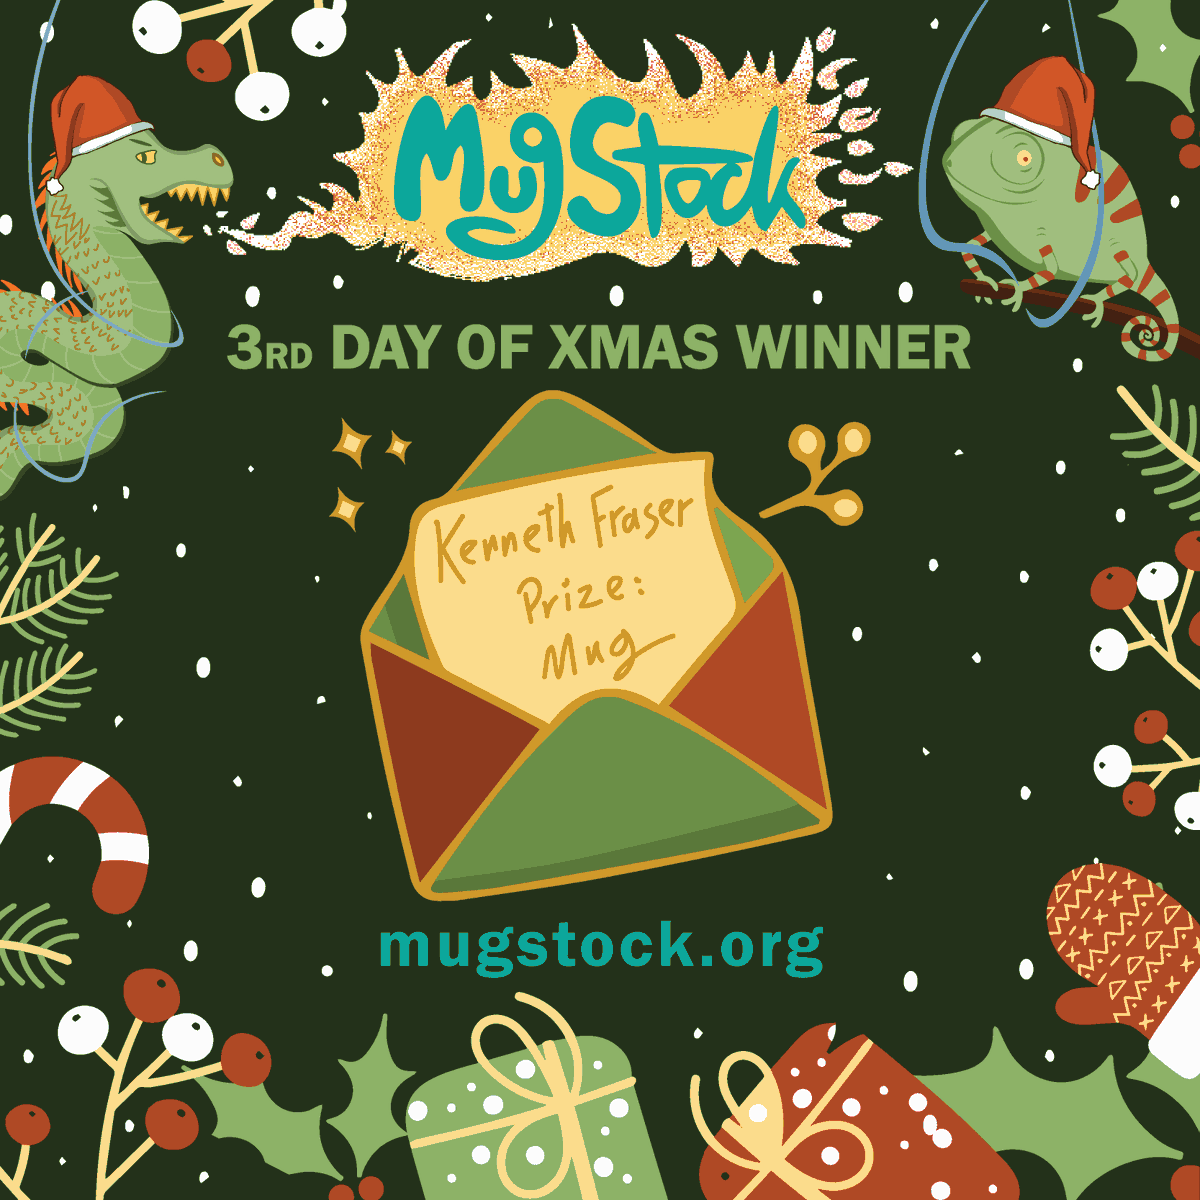 Congratulations to the 3rd winner of our 12 Days of Christmas Giveaway! 🎉 There's still 9 gifts up for grabs: 🎁 3 x MugStock Hoodies 3 x MugStock T-Shirts 2 x MugStock Mugs 1 x Pair of Adult Weekend Tickets So get your tickets to be entered 🎟️ mugstock.org/tickets/